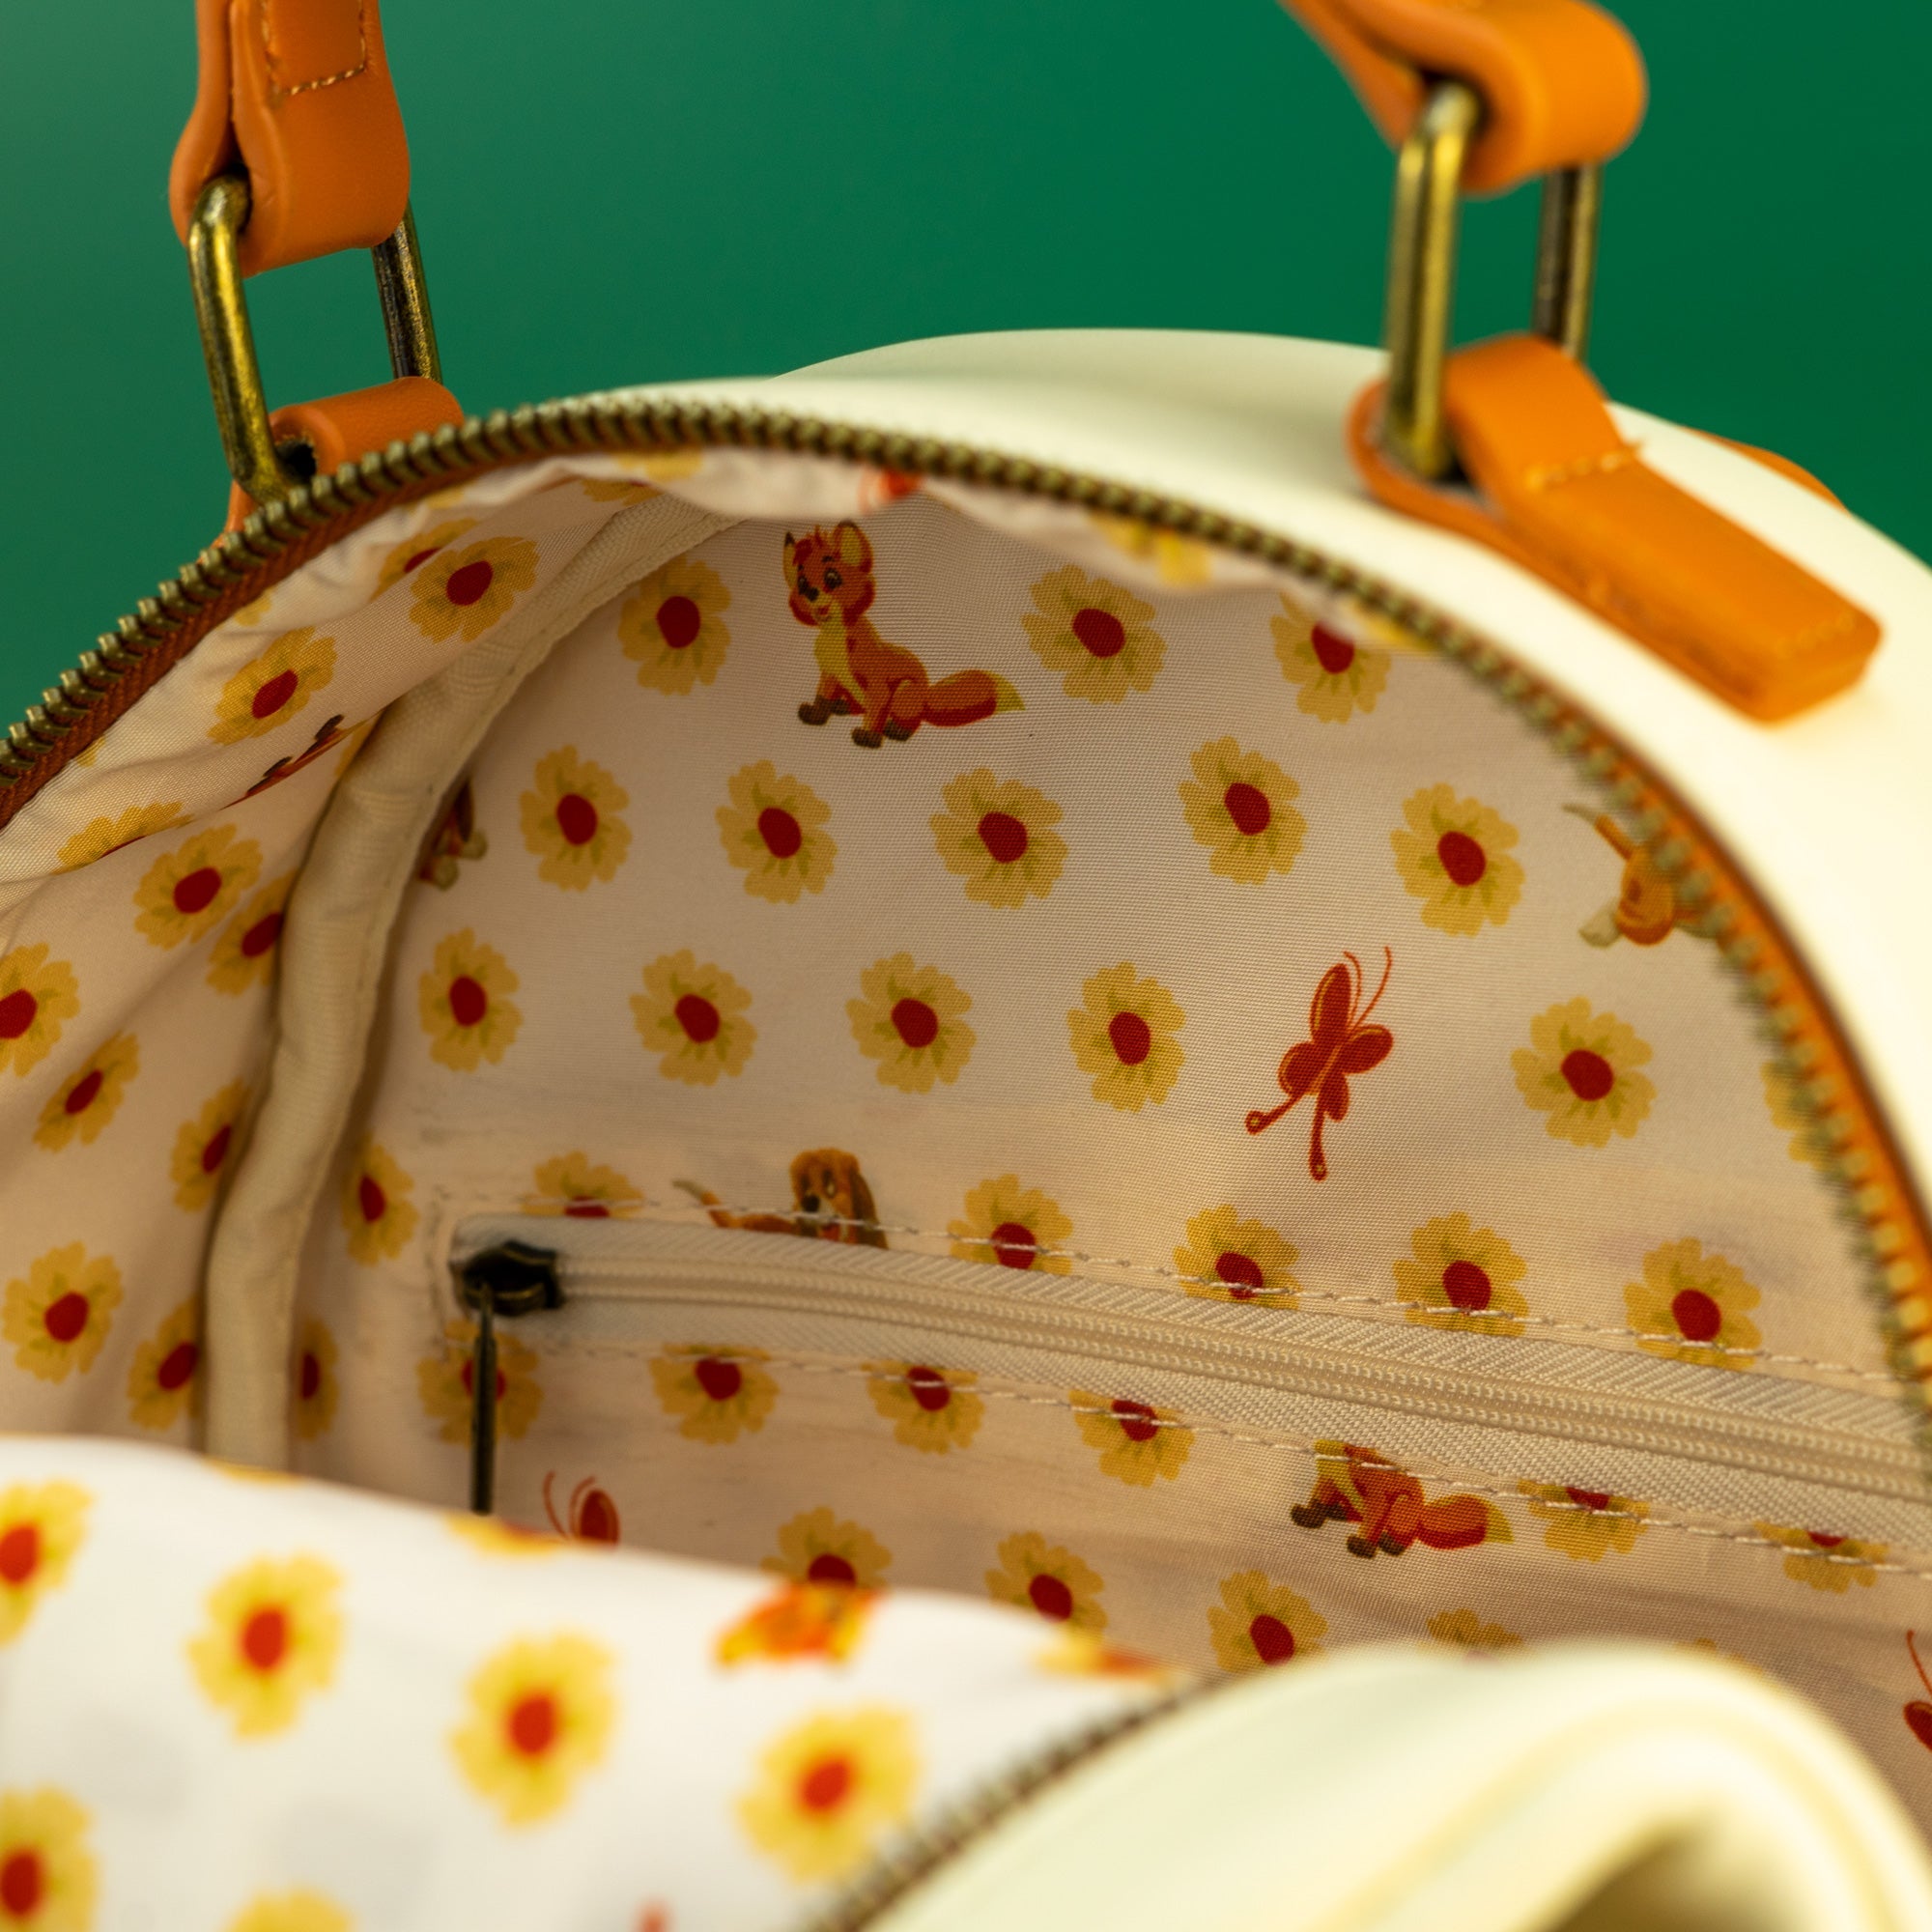 Loungefly x Disney Fox and the Hound Floral Mini Backpack - GeekCore